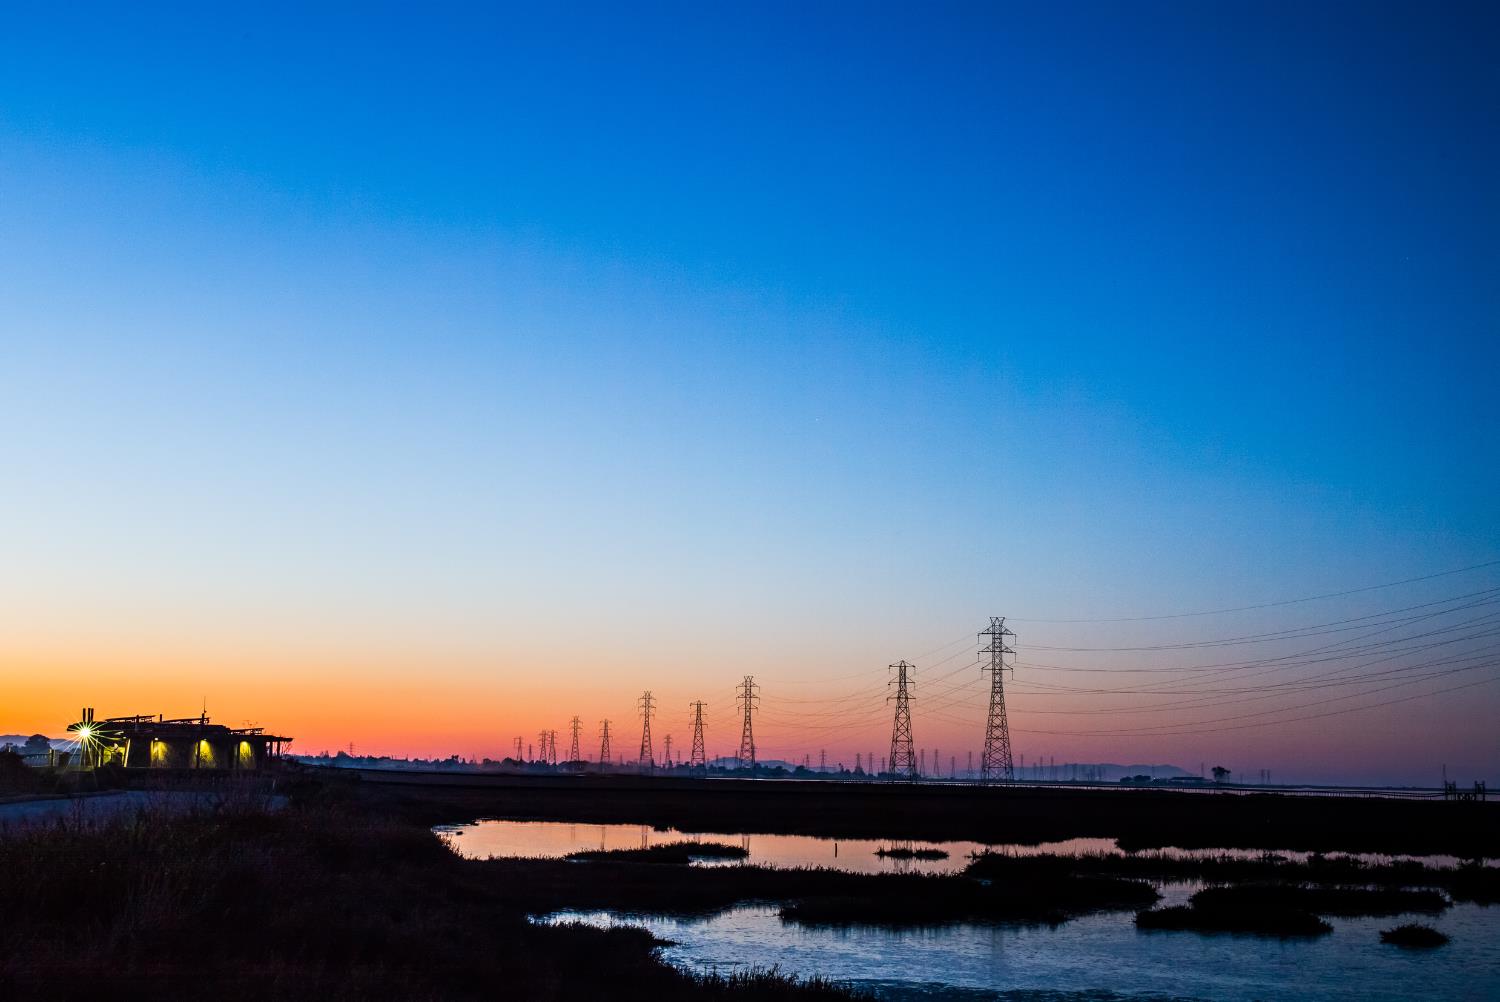 A colorful orange-yellow sunset view of the Baylands with the lighted interpretive center and distant electrical towers silhouetted against the darkening sky